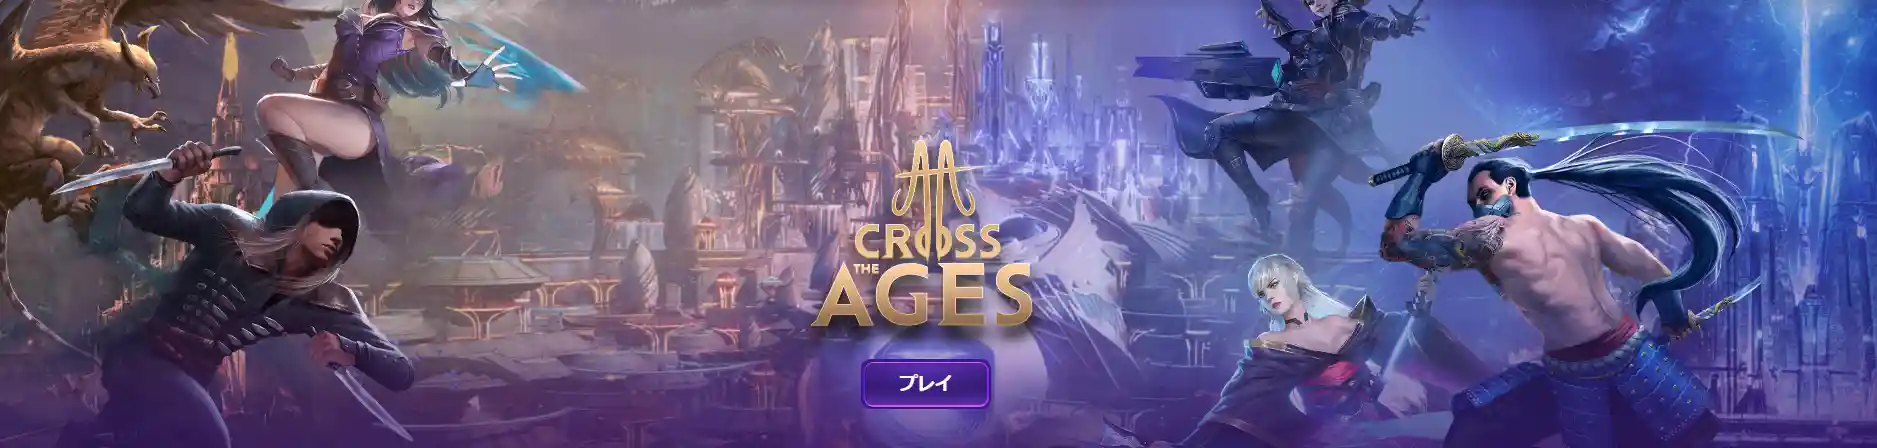 Cross The Ages スタート画面